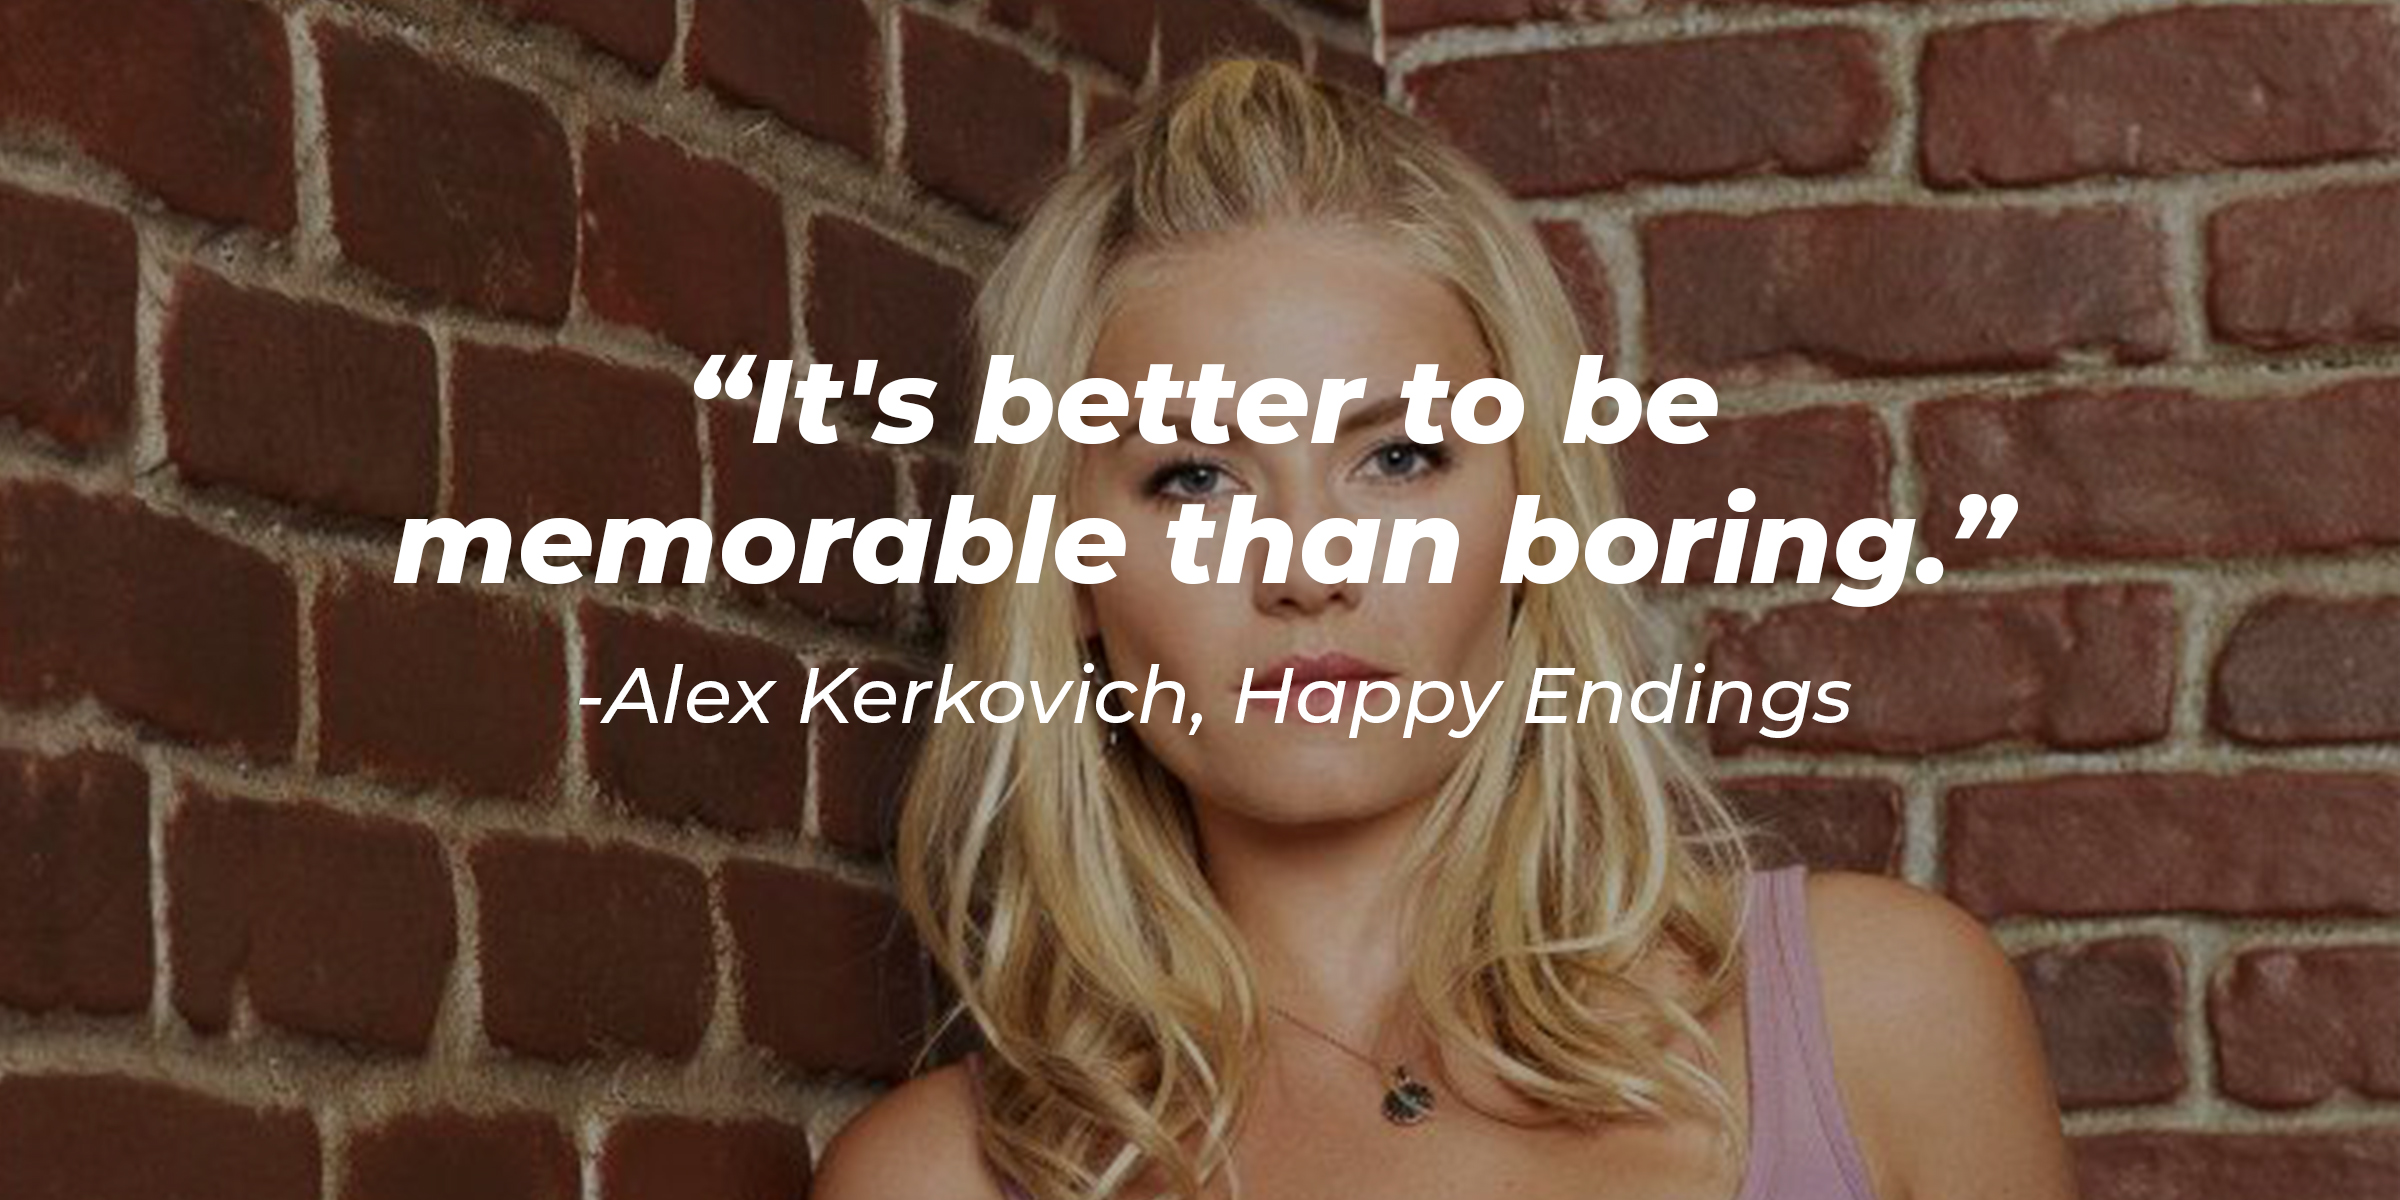 Alex Kerkovich's quote, "Its better to be memorable than boring." | Source: Facebook/HappyEndings